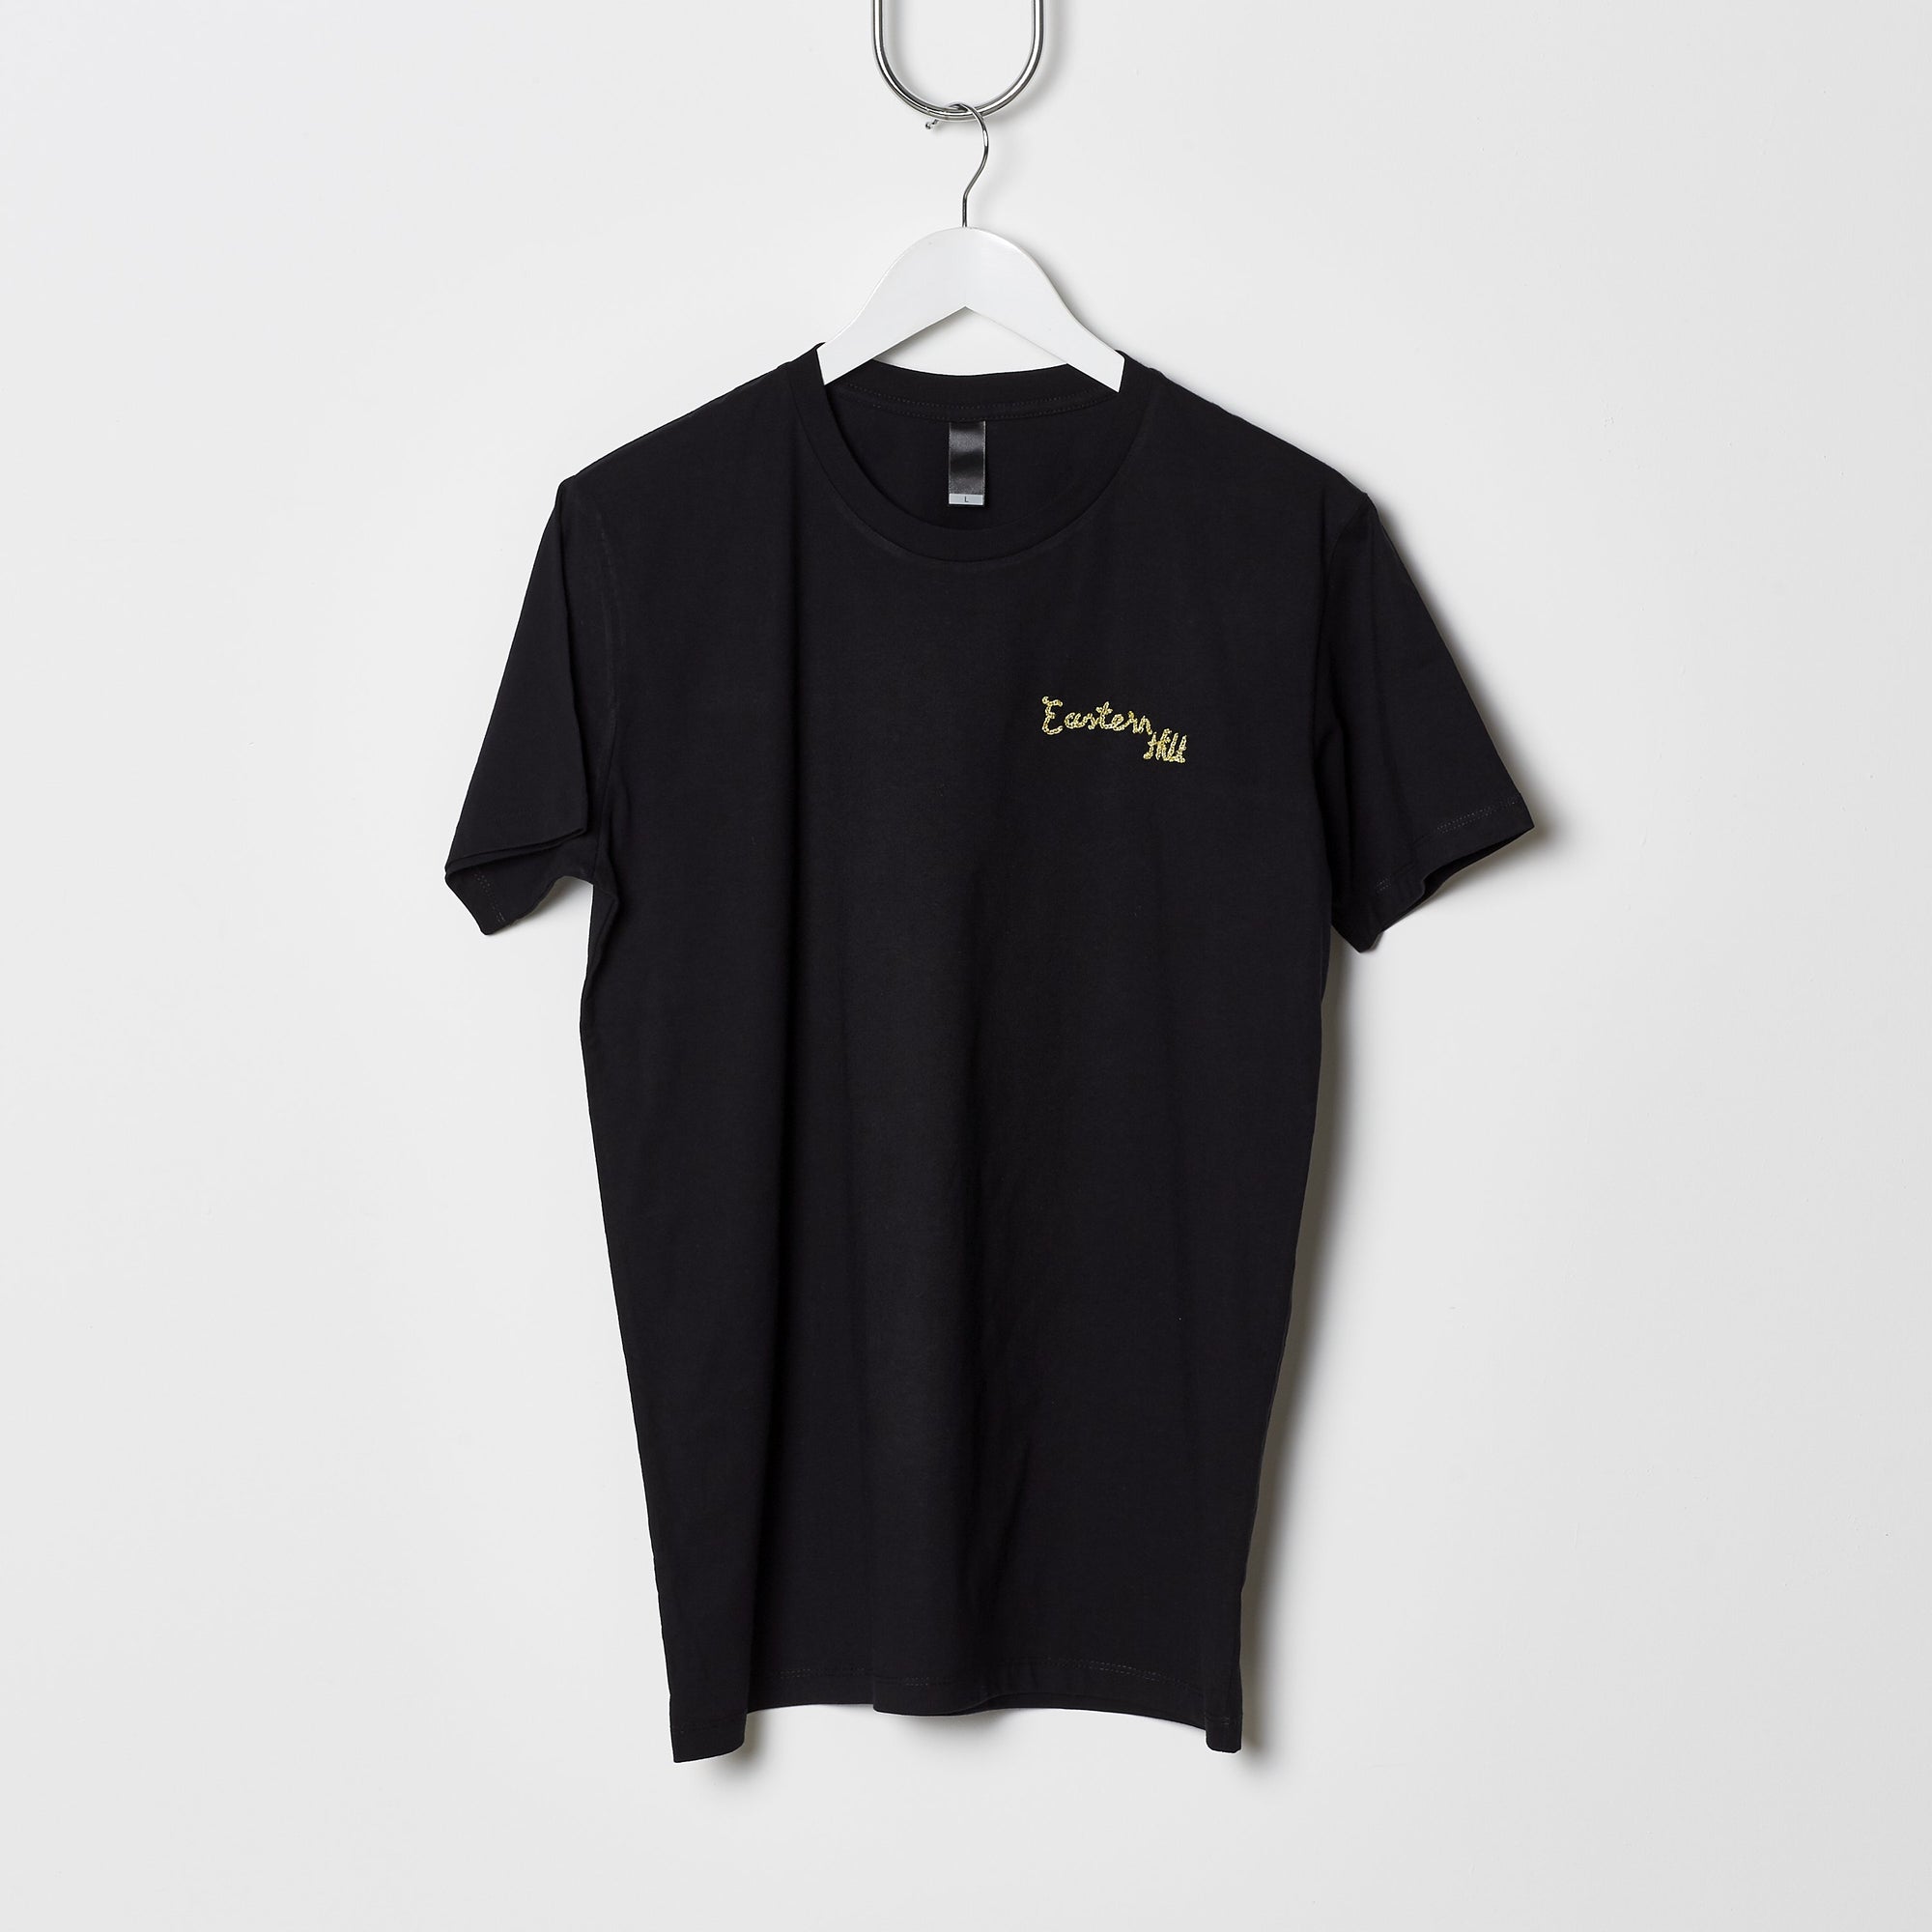 Eastern Hill General Supplies Chain Stitch Embroidered Tee - Black/Gold